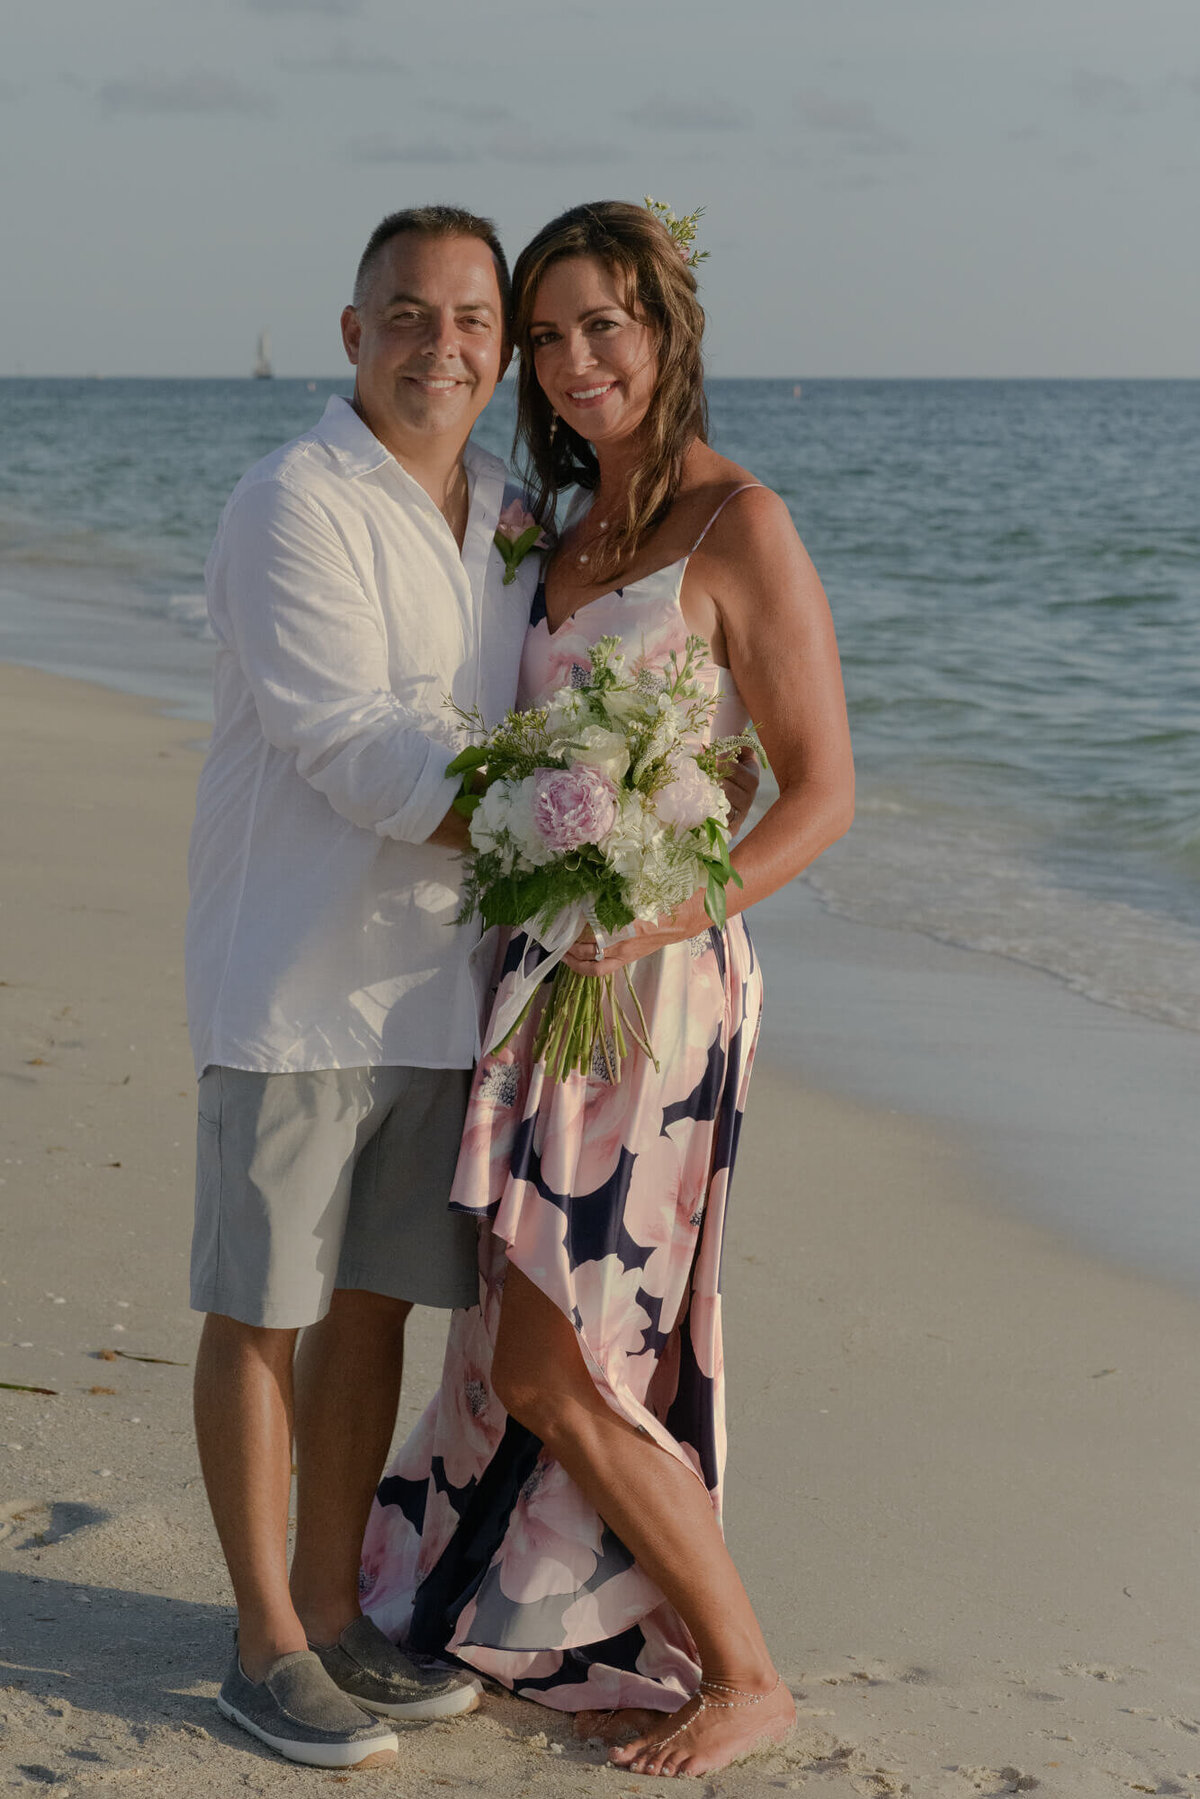 Husband and wife at beach wedding